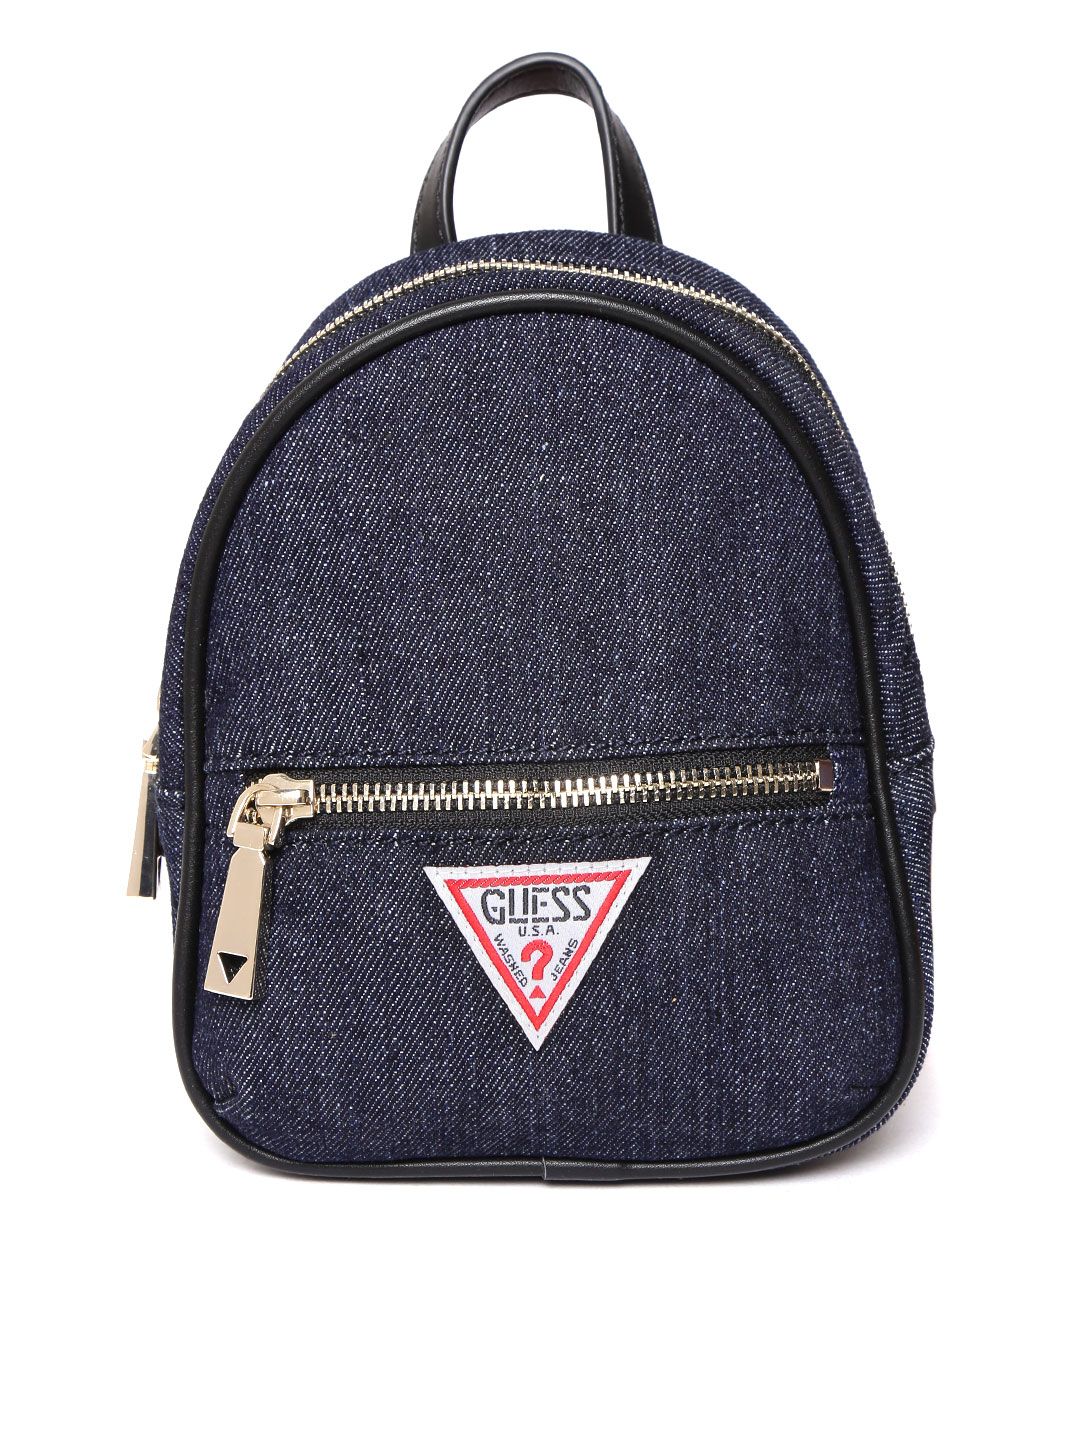 GUESS Women Navy Blue Solid Denim Backpack Price in India